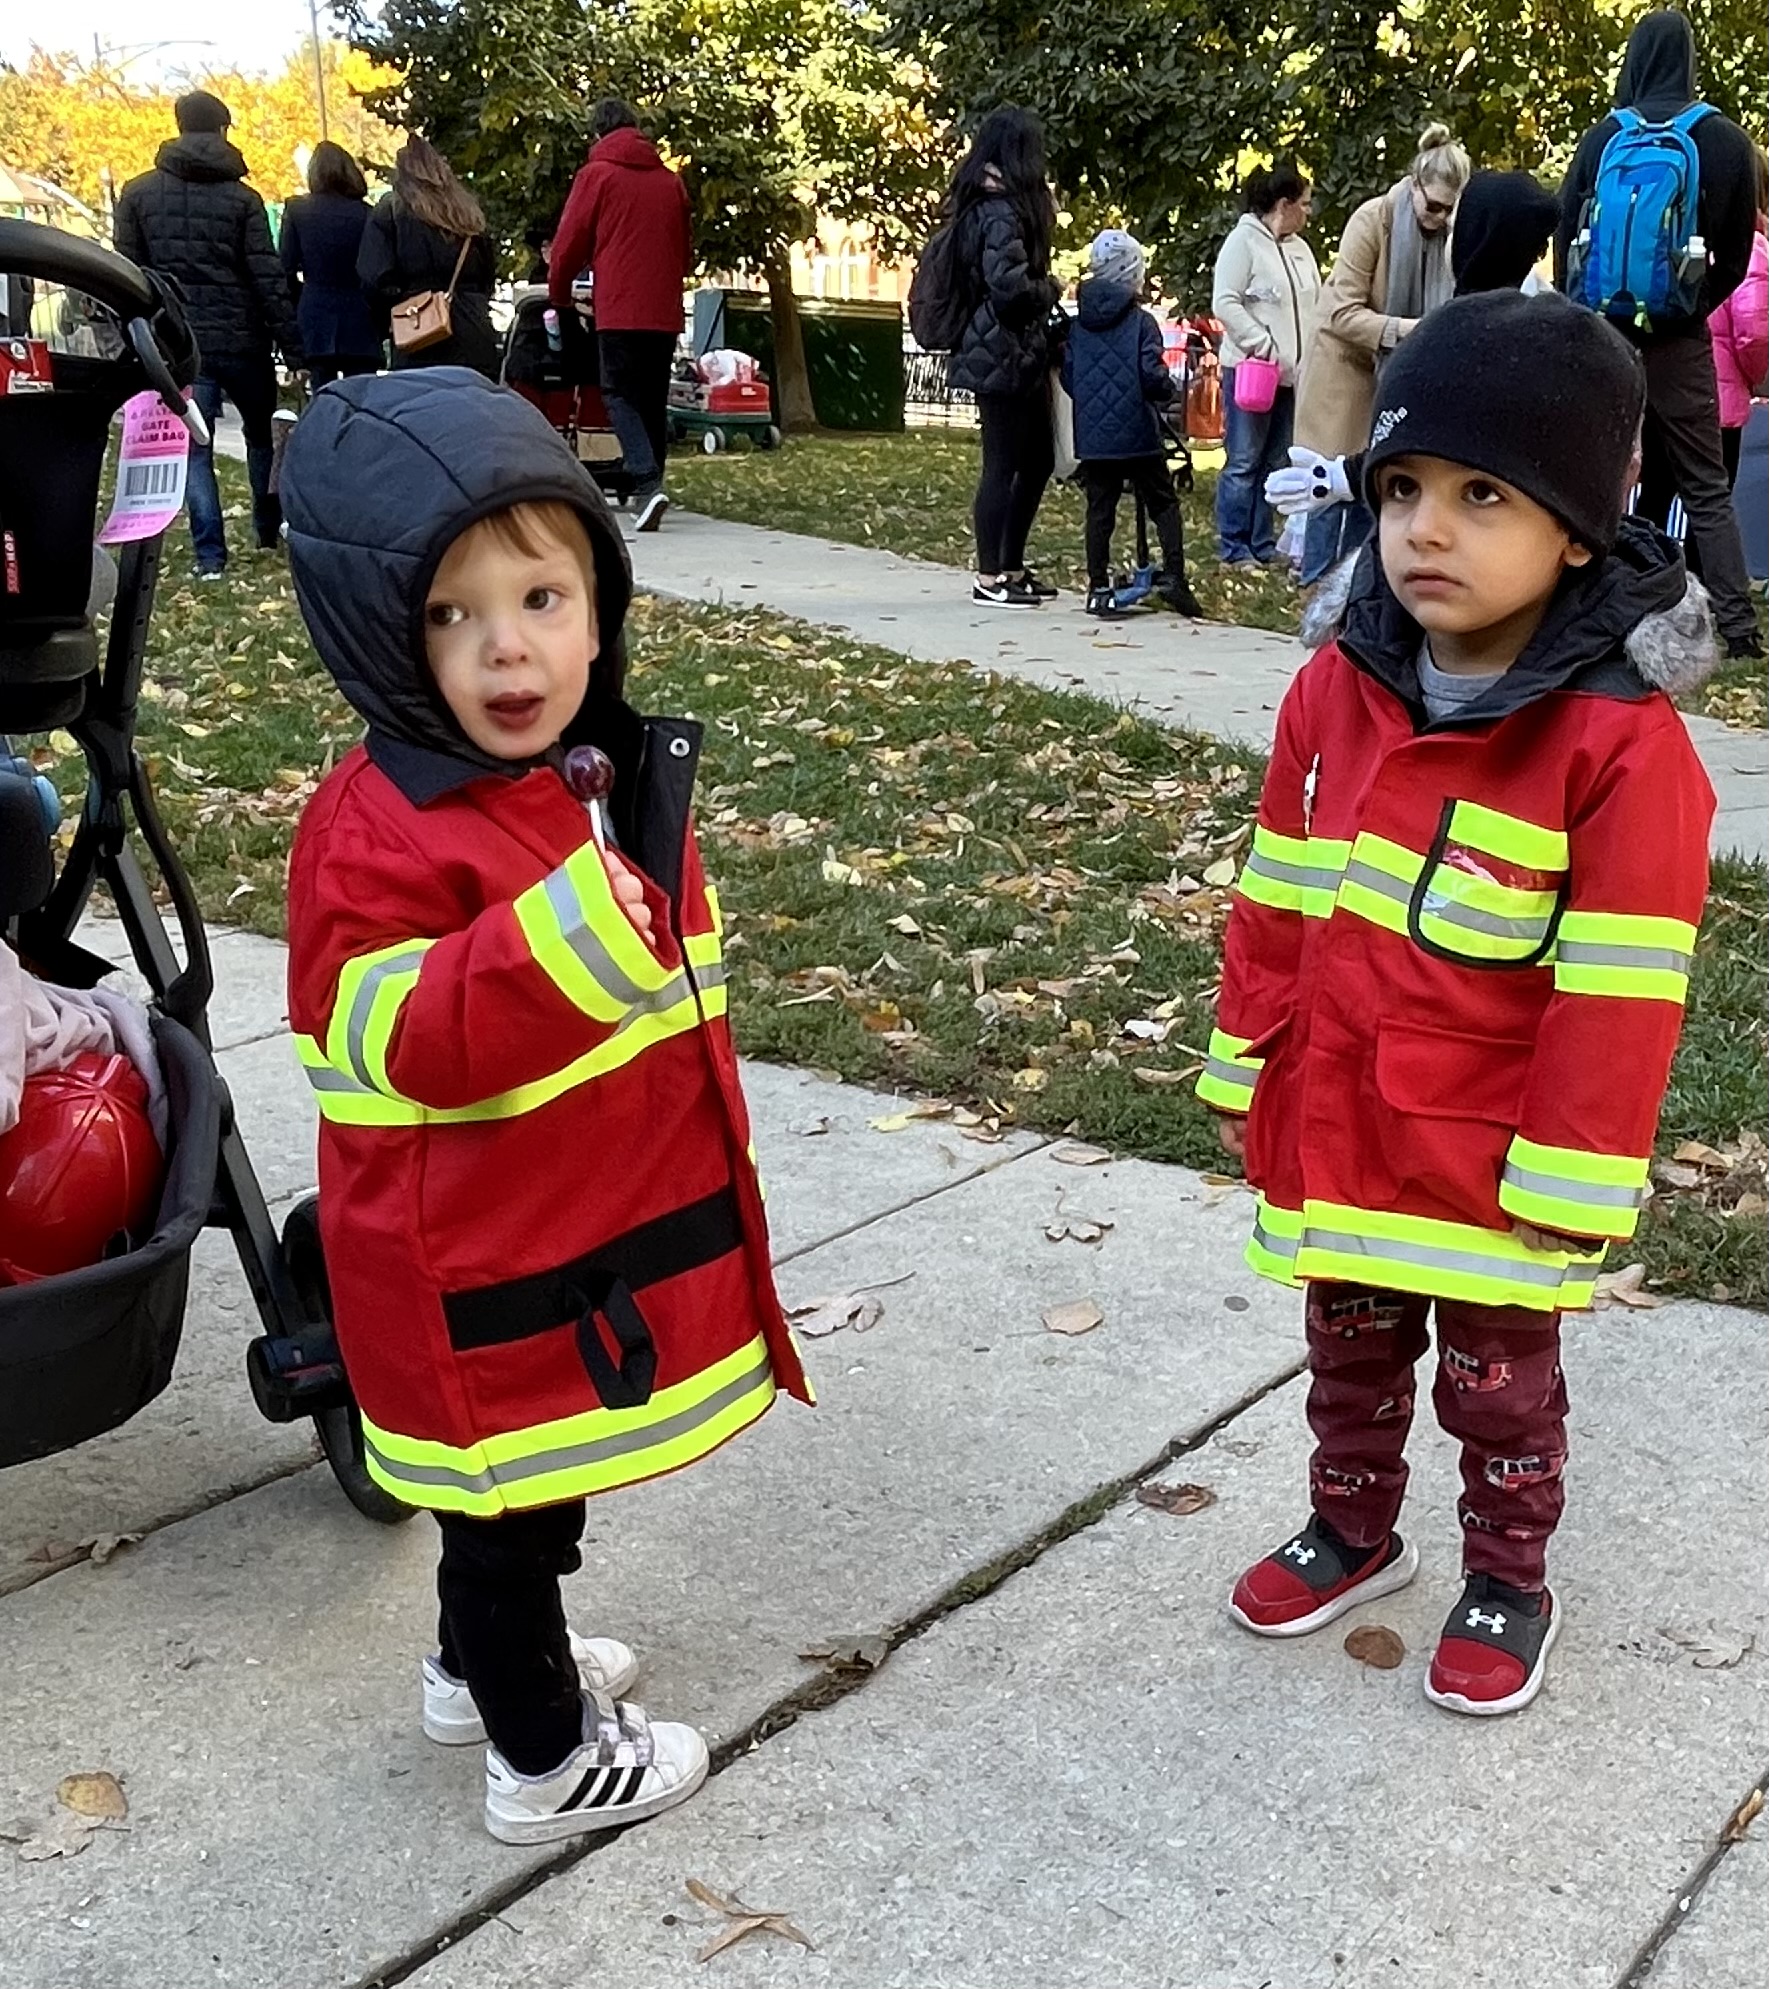 Two Firefighters